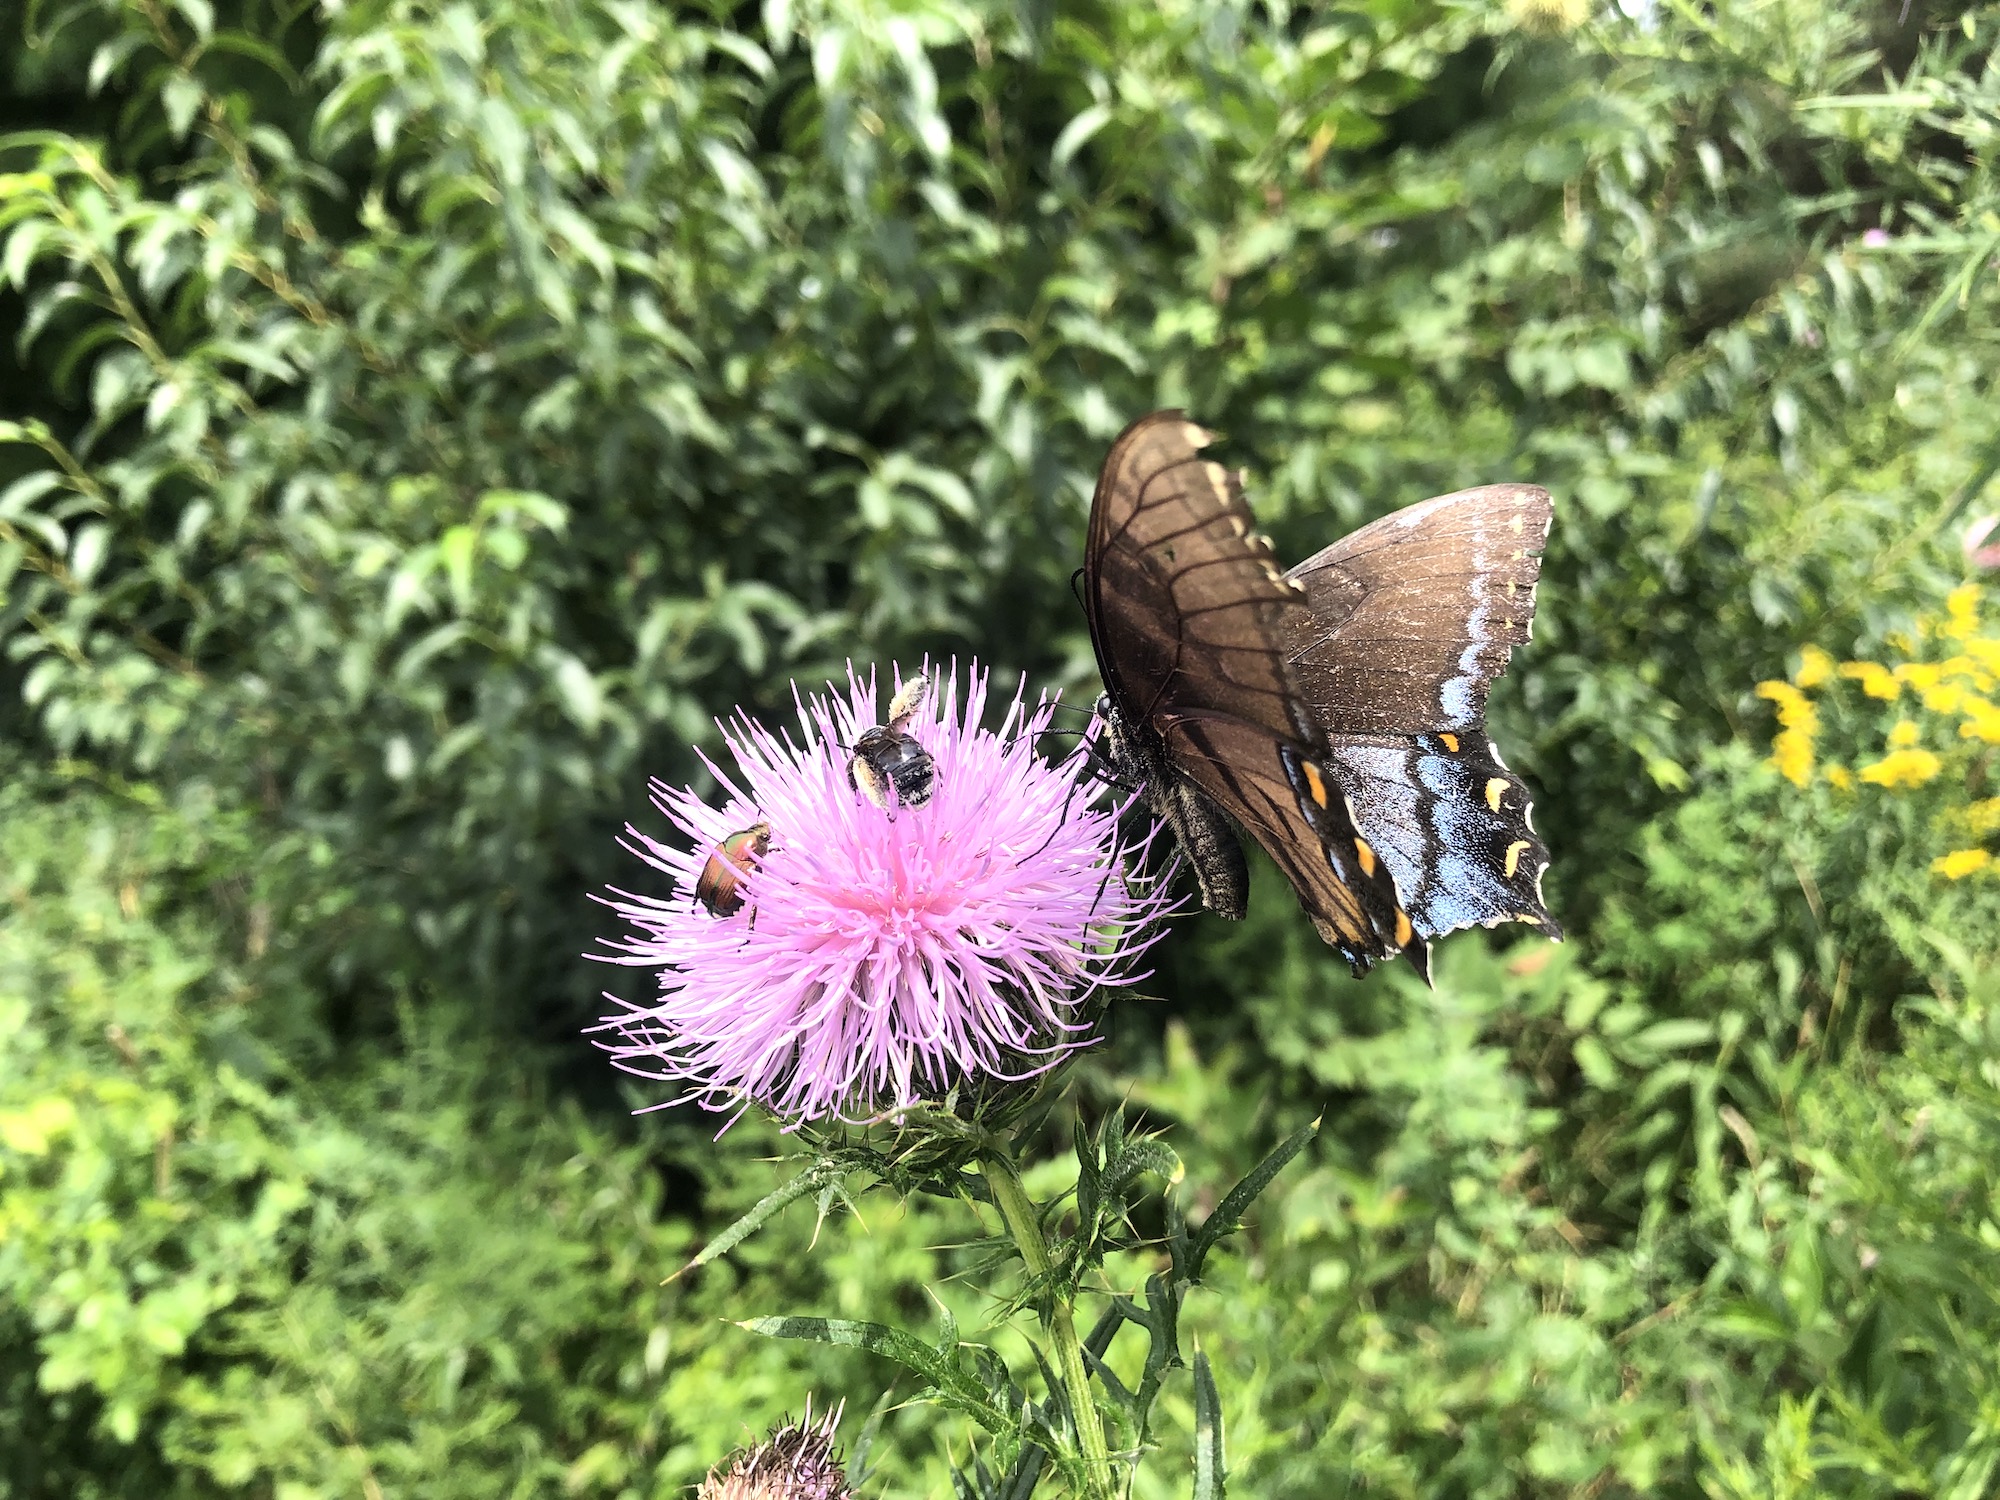 Female Eastern Tiger Swallowtail butterfly on Field Thistle in the Prairie Moraine Dog Park in Verona, Wisconsin on August 15, 2022.